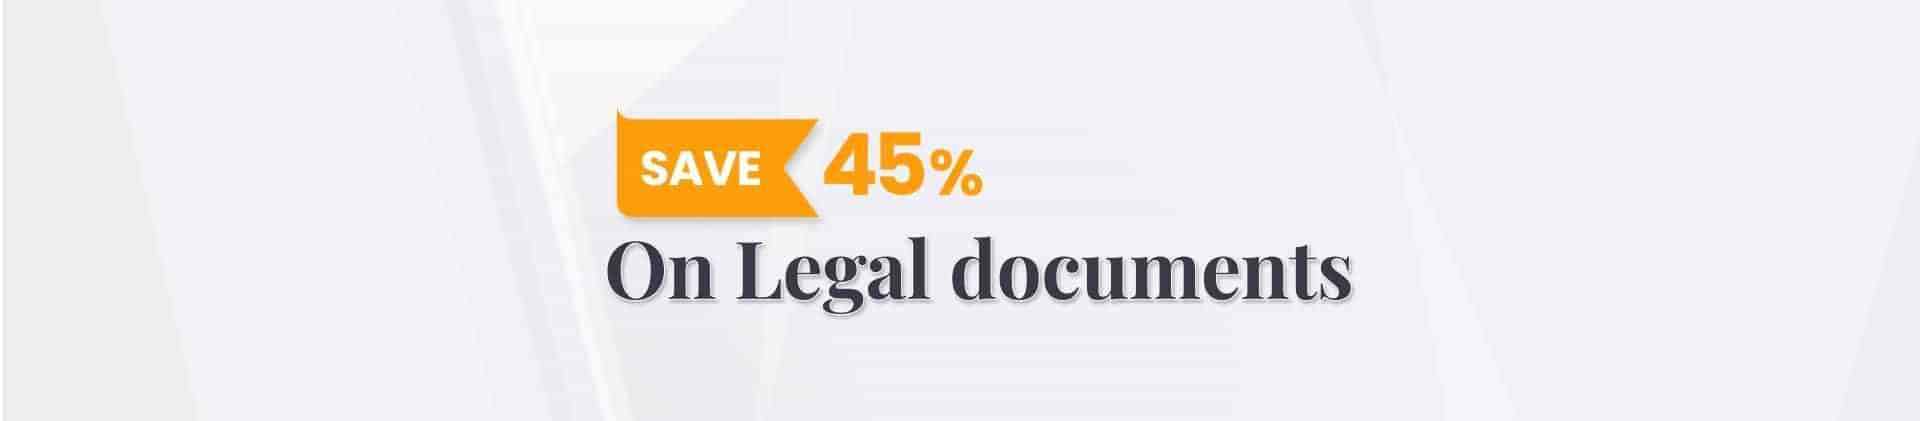 LegalKart - Discount 45% on Legal Documents